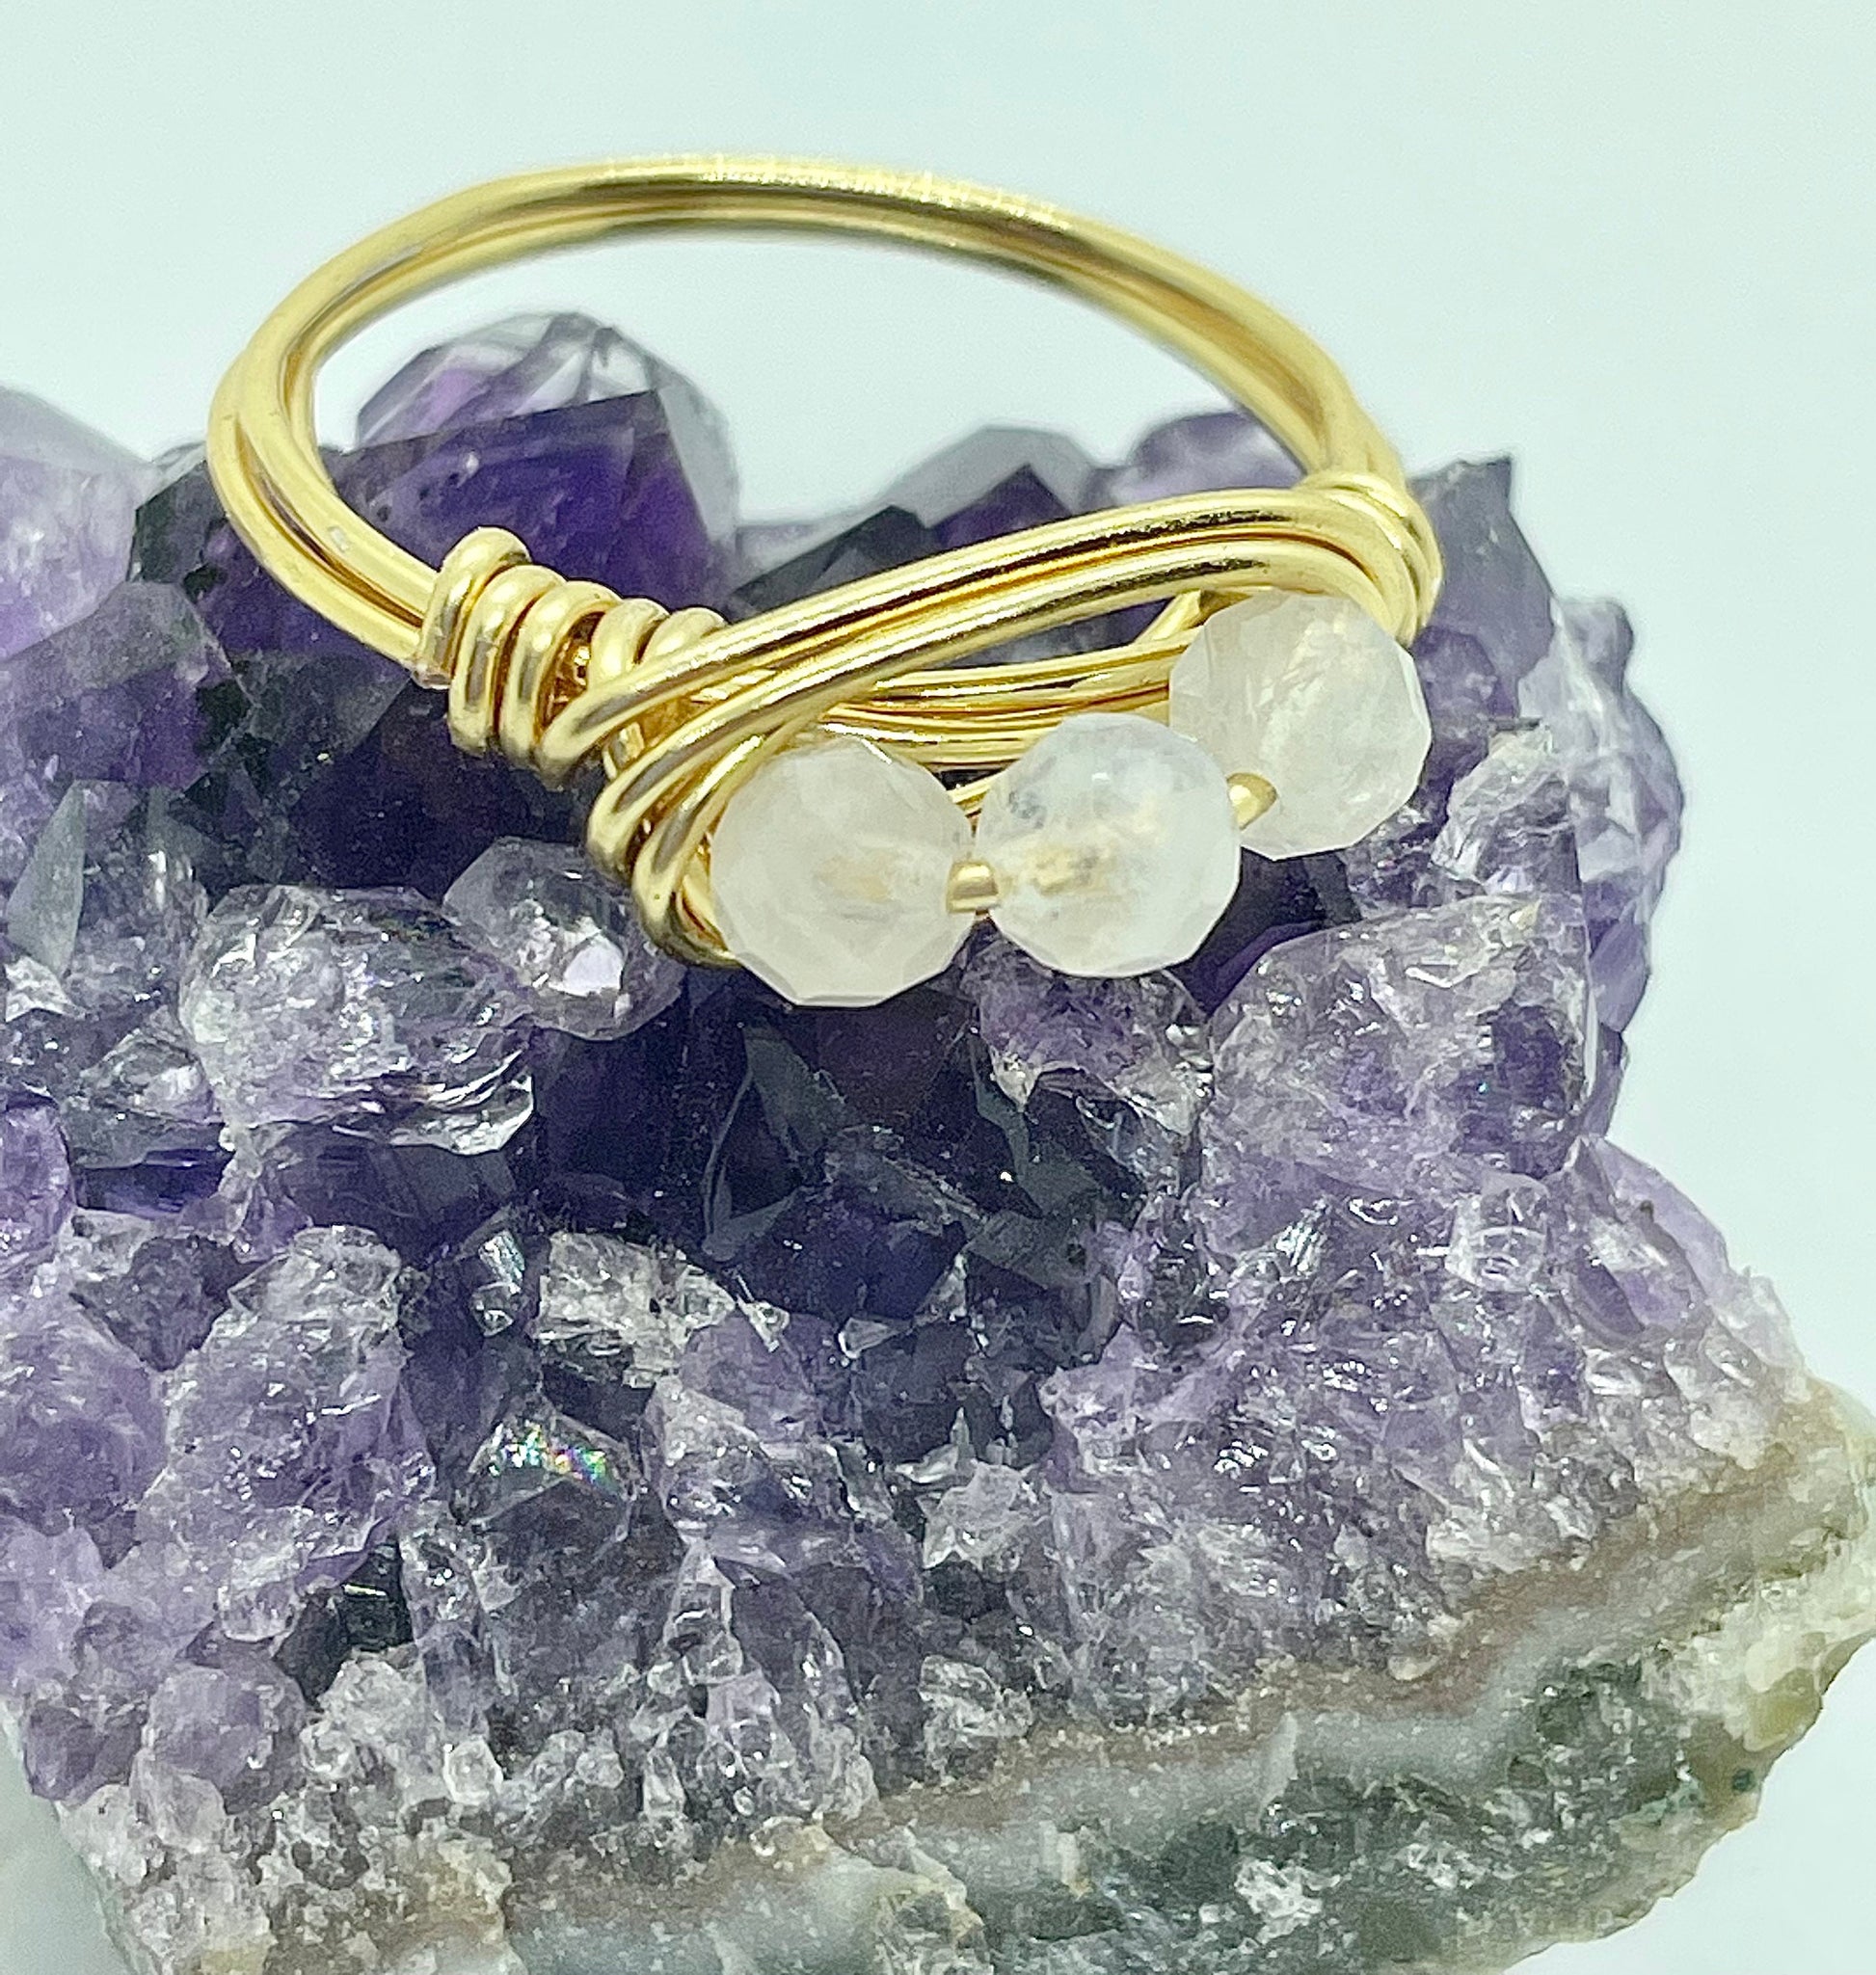 Moonstone Ring, Wire Wrapped Ring With Moonstone, Moonstone Jewelry, Preppy Jewelry, Fairycore Aesthetic Rings, Gold Plated Trendy Rings